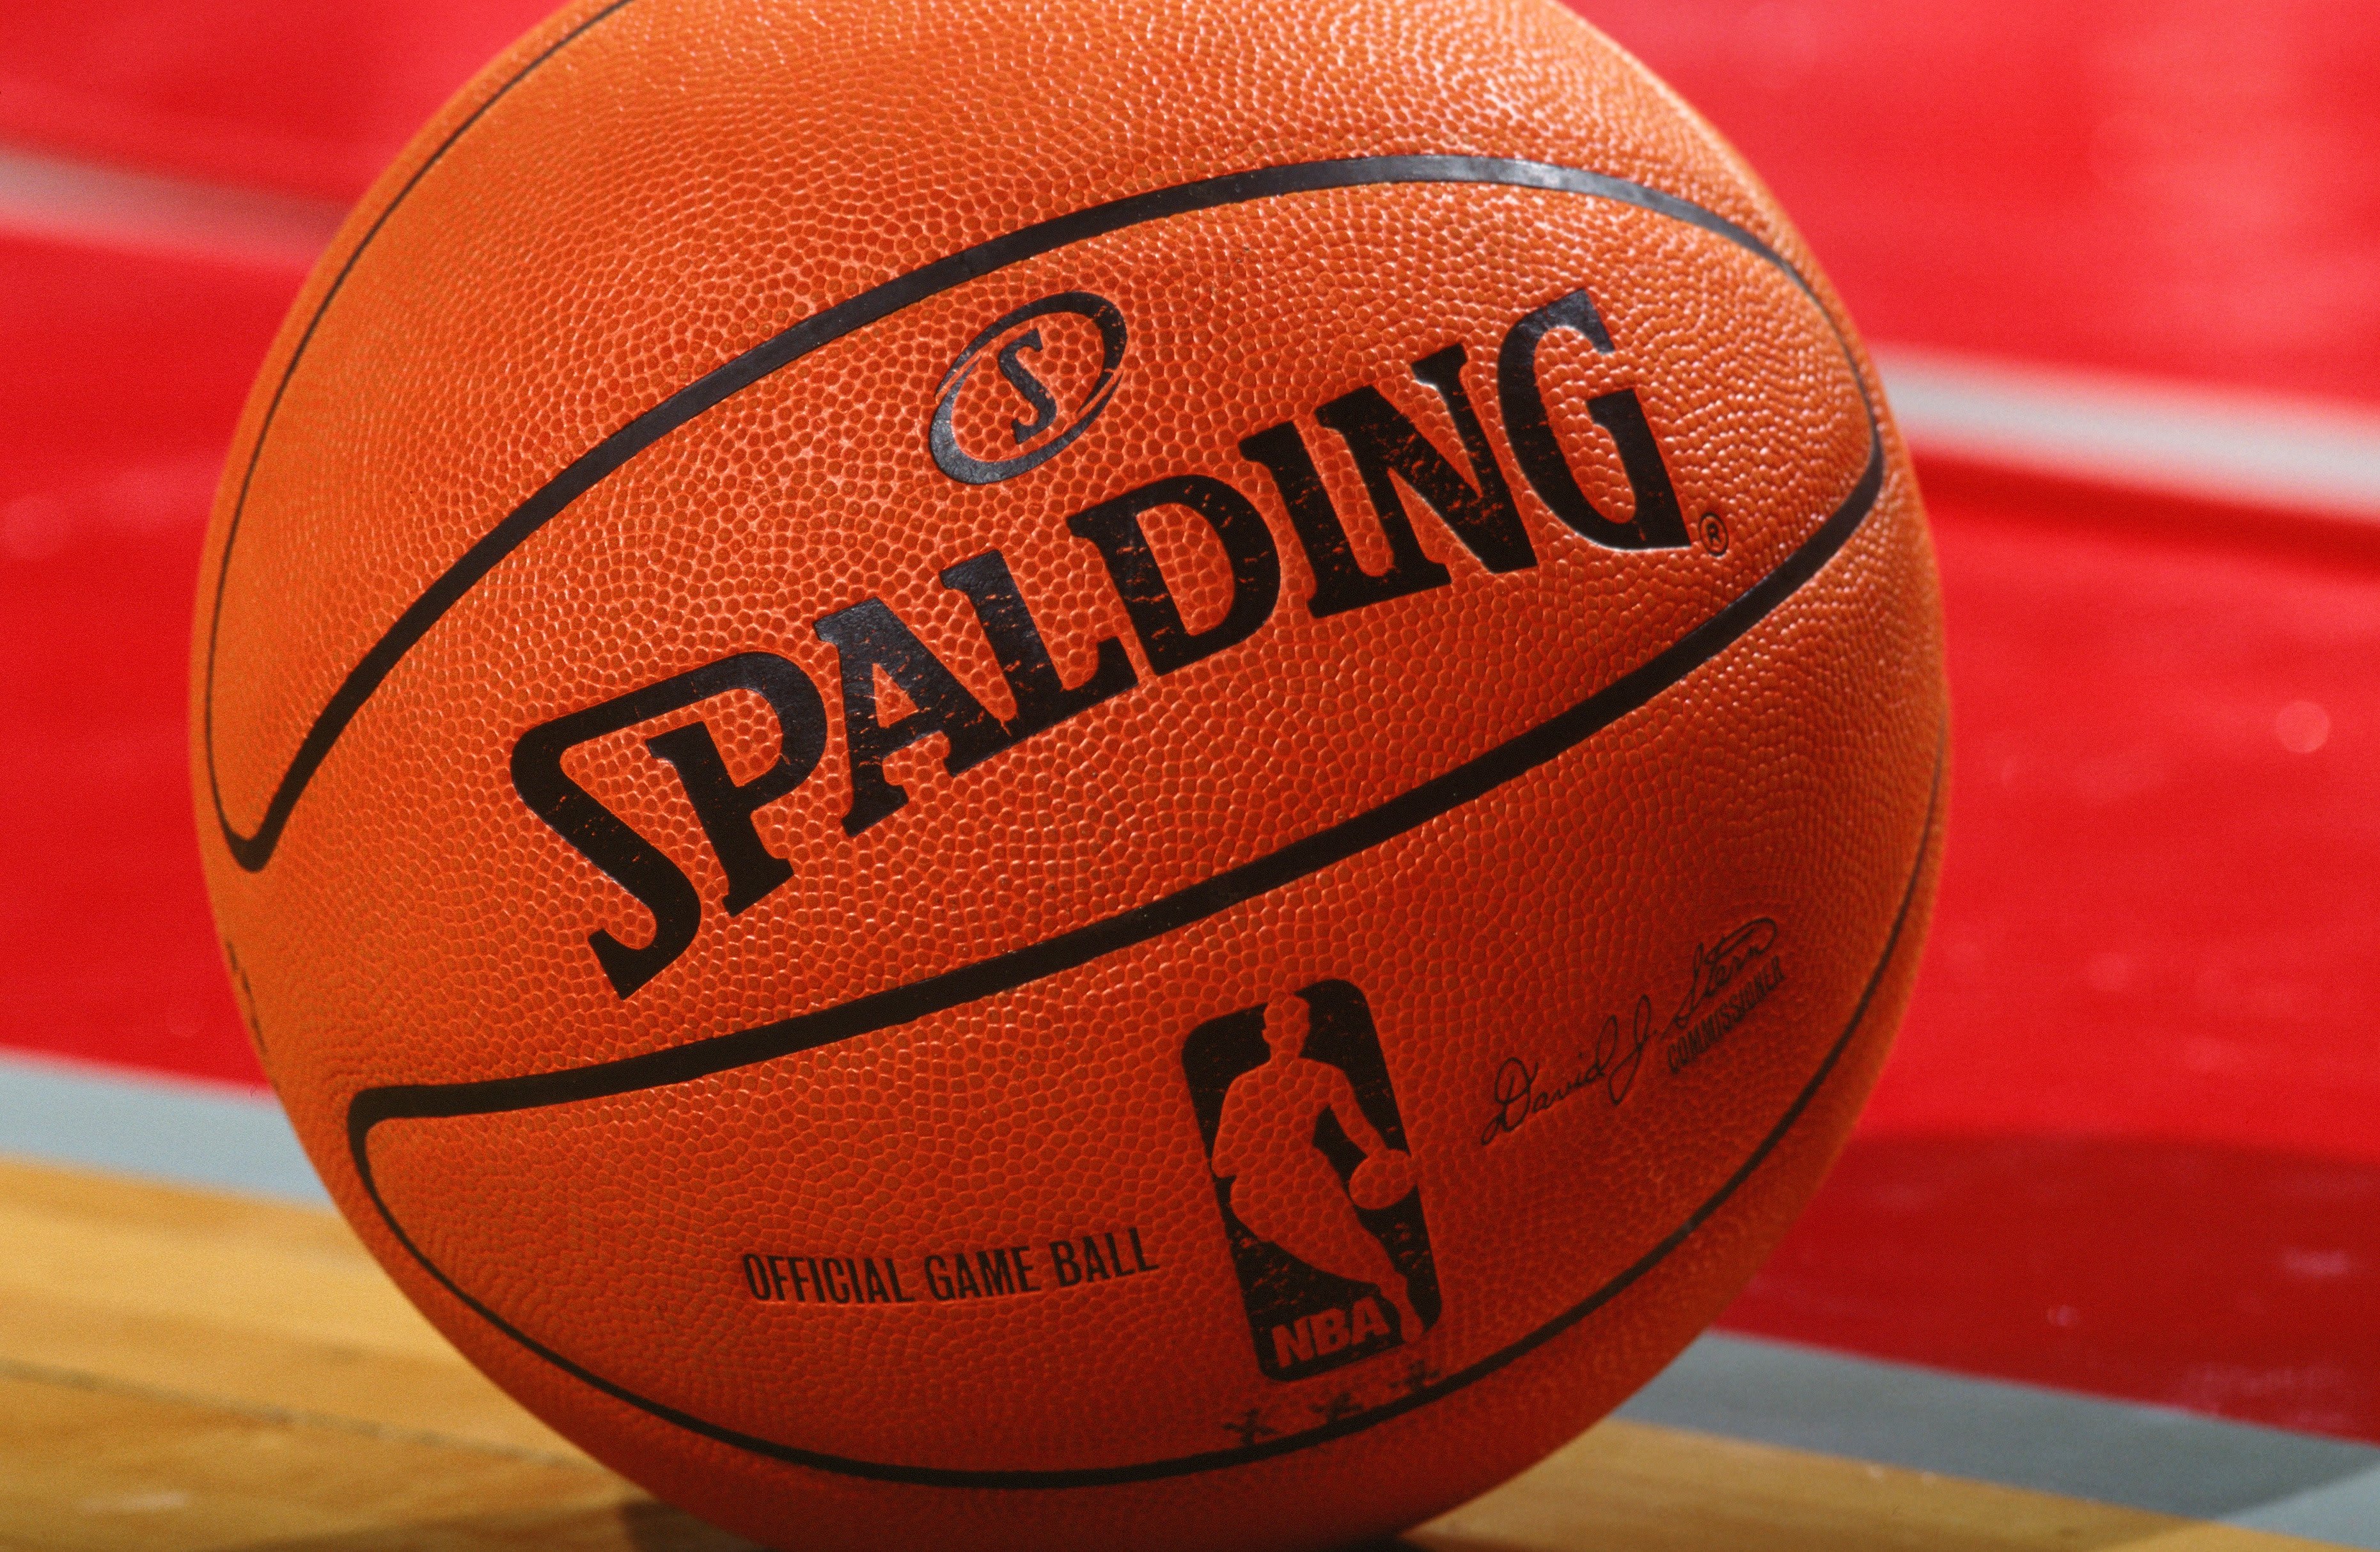 Remembering One of the NBA’s Biggest Failed Experiments The "New Ball